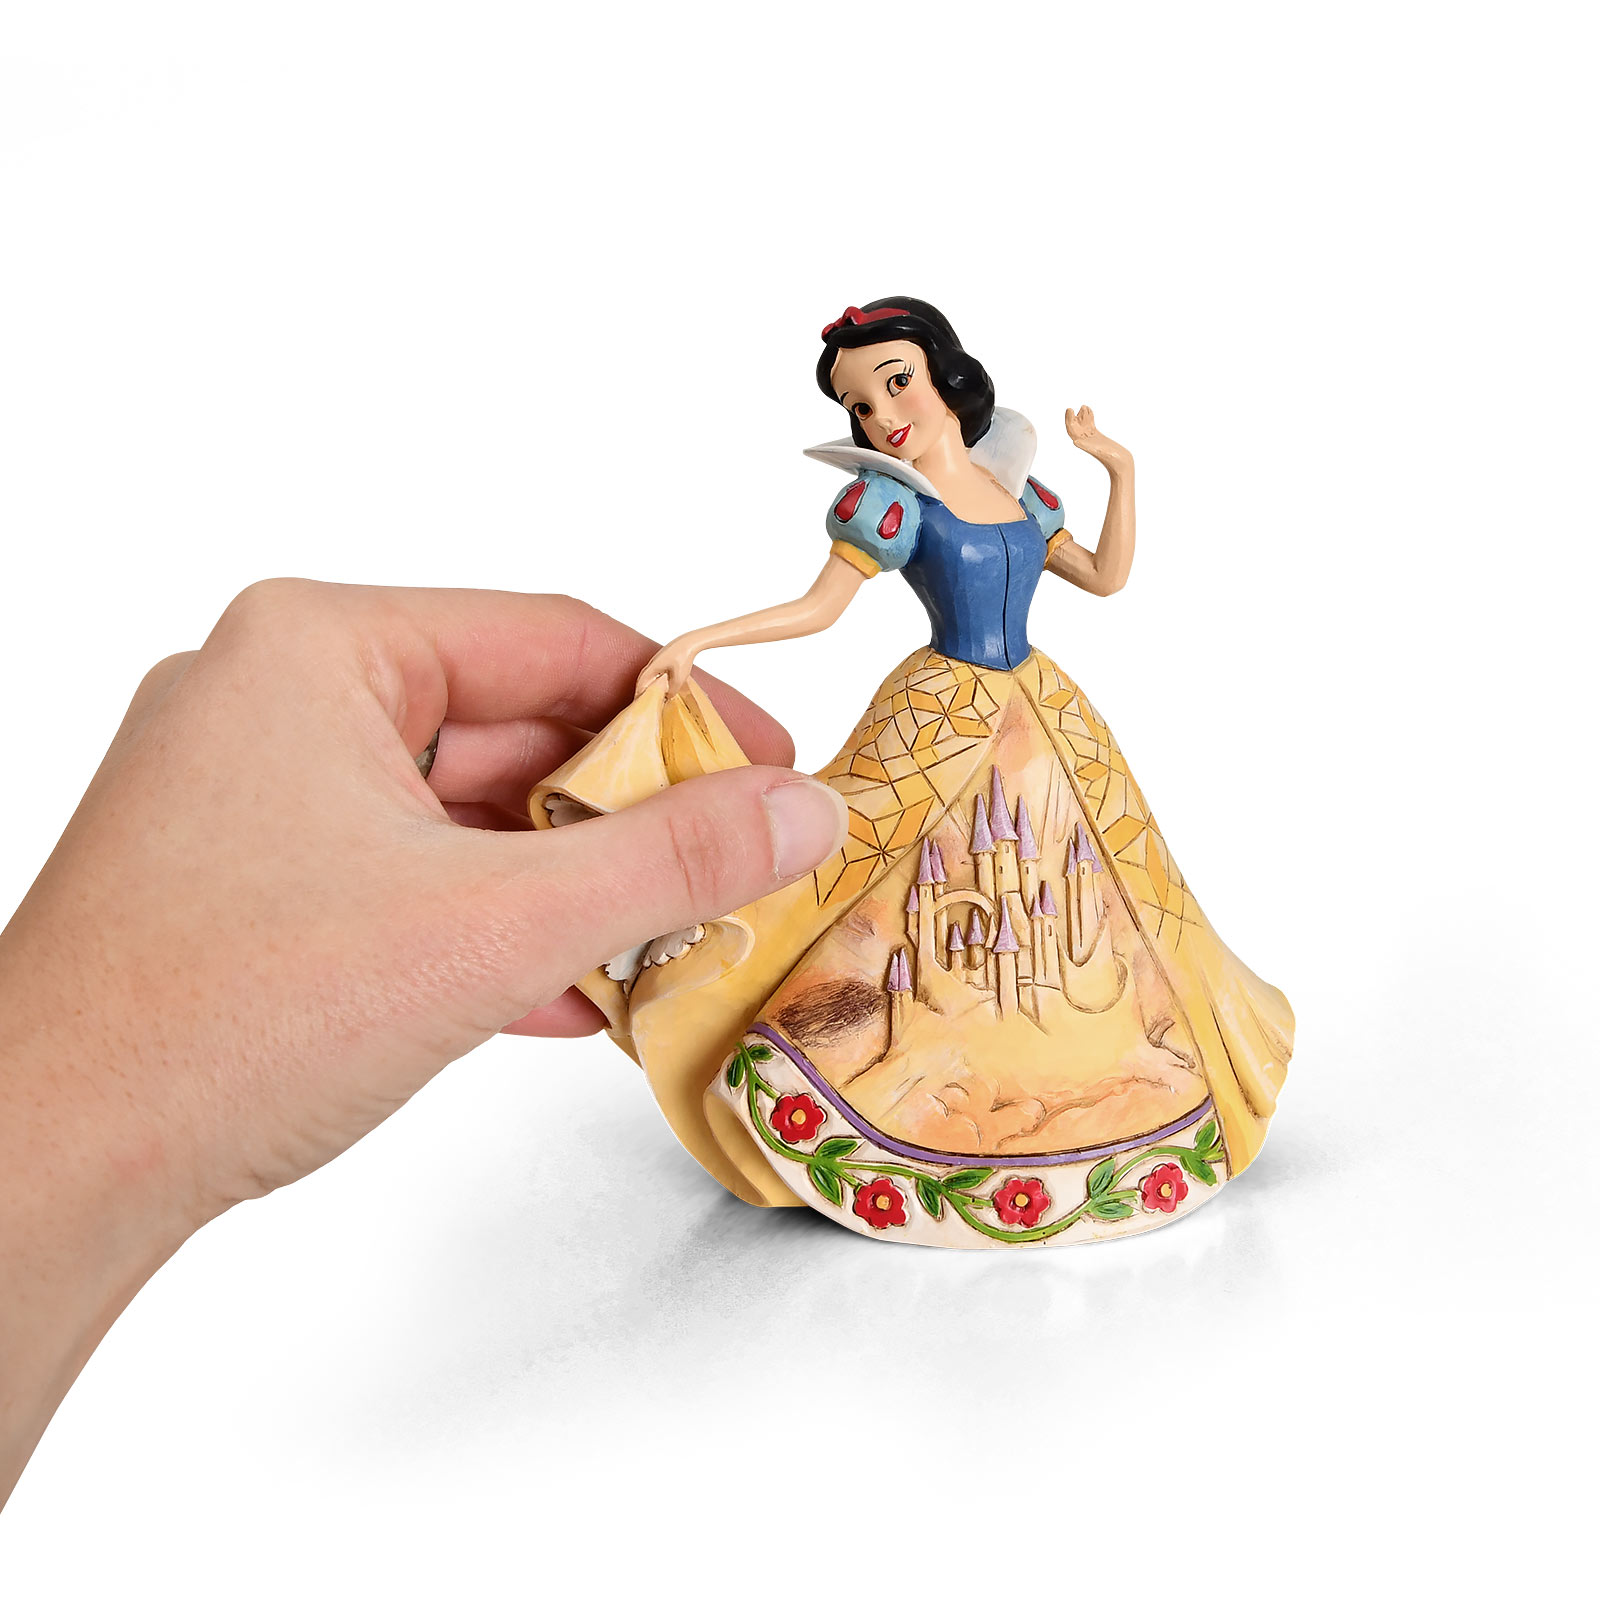 Blanche-Neige - Castle in the Clouds Figurine